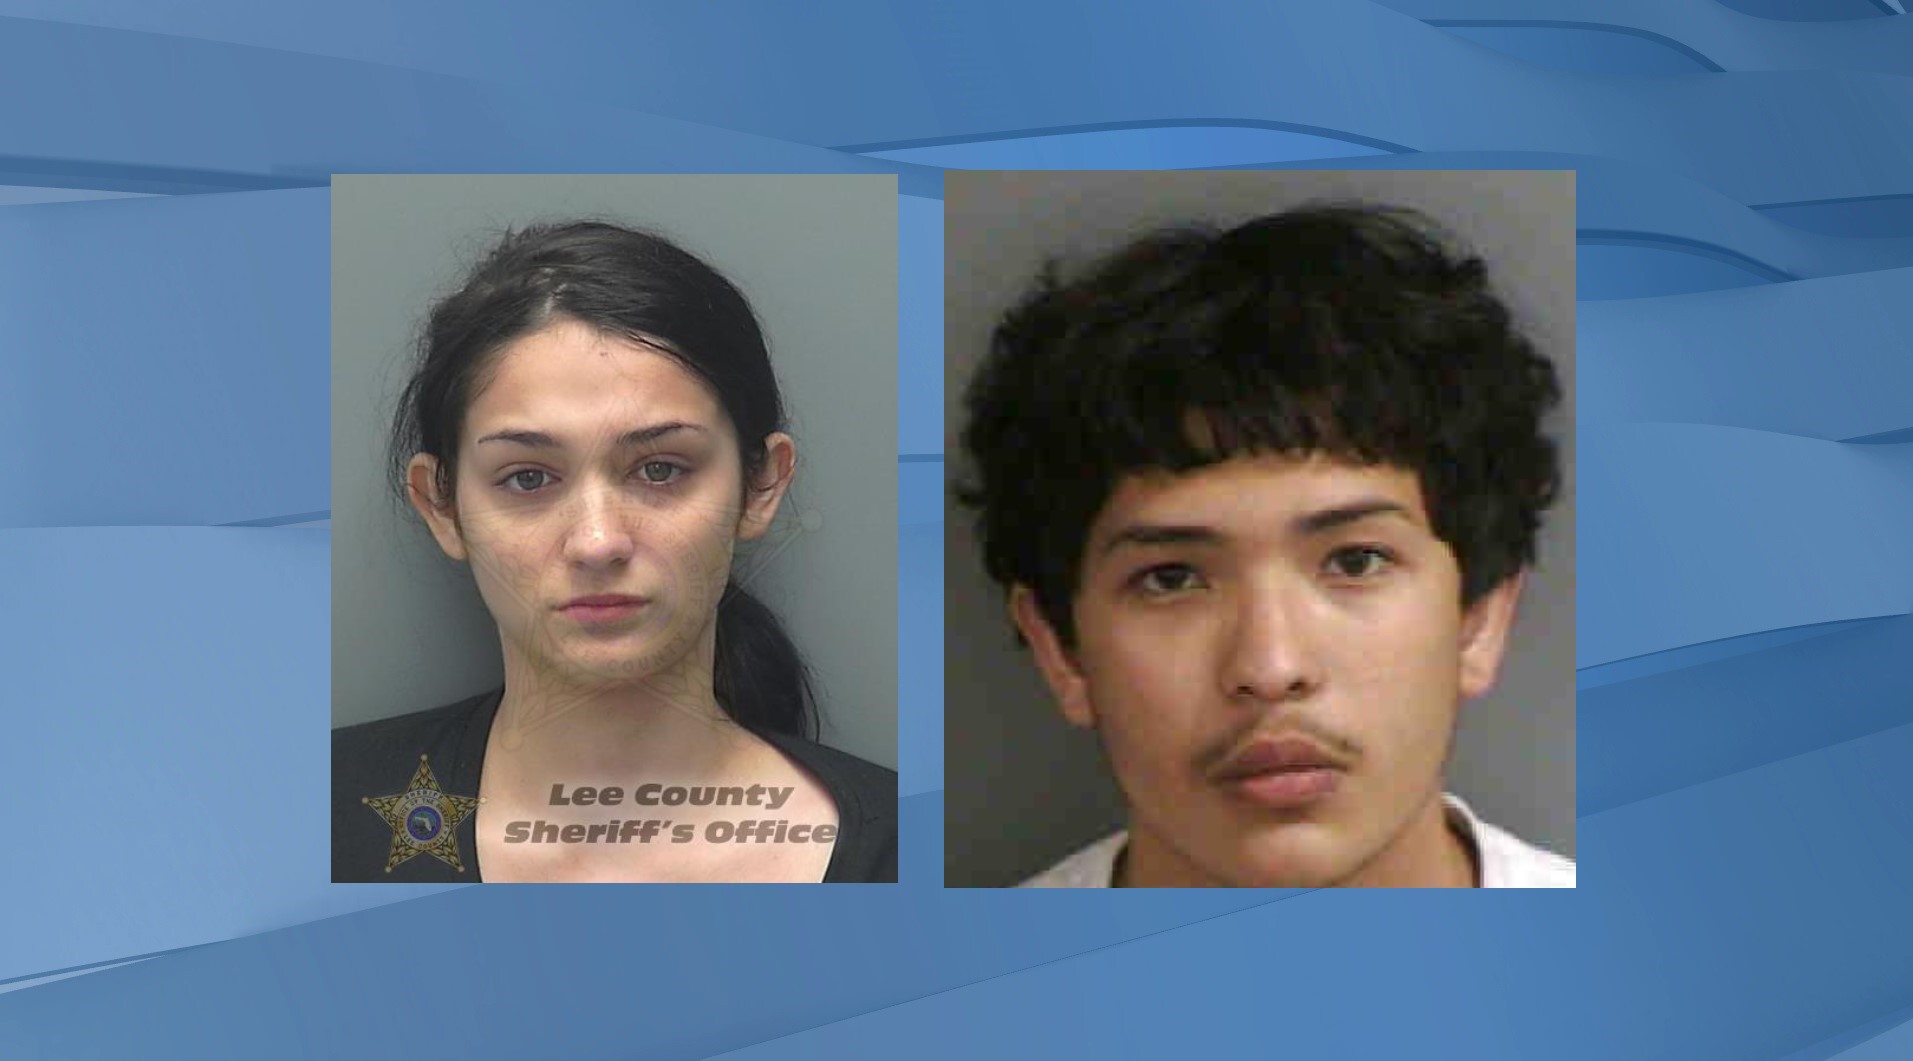 2 Lee County 16-year-olds arrested in connection with armed robbery